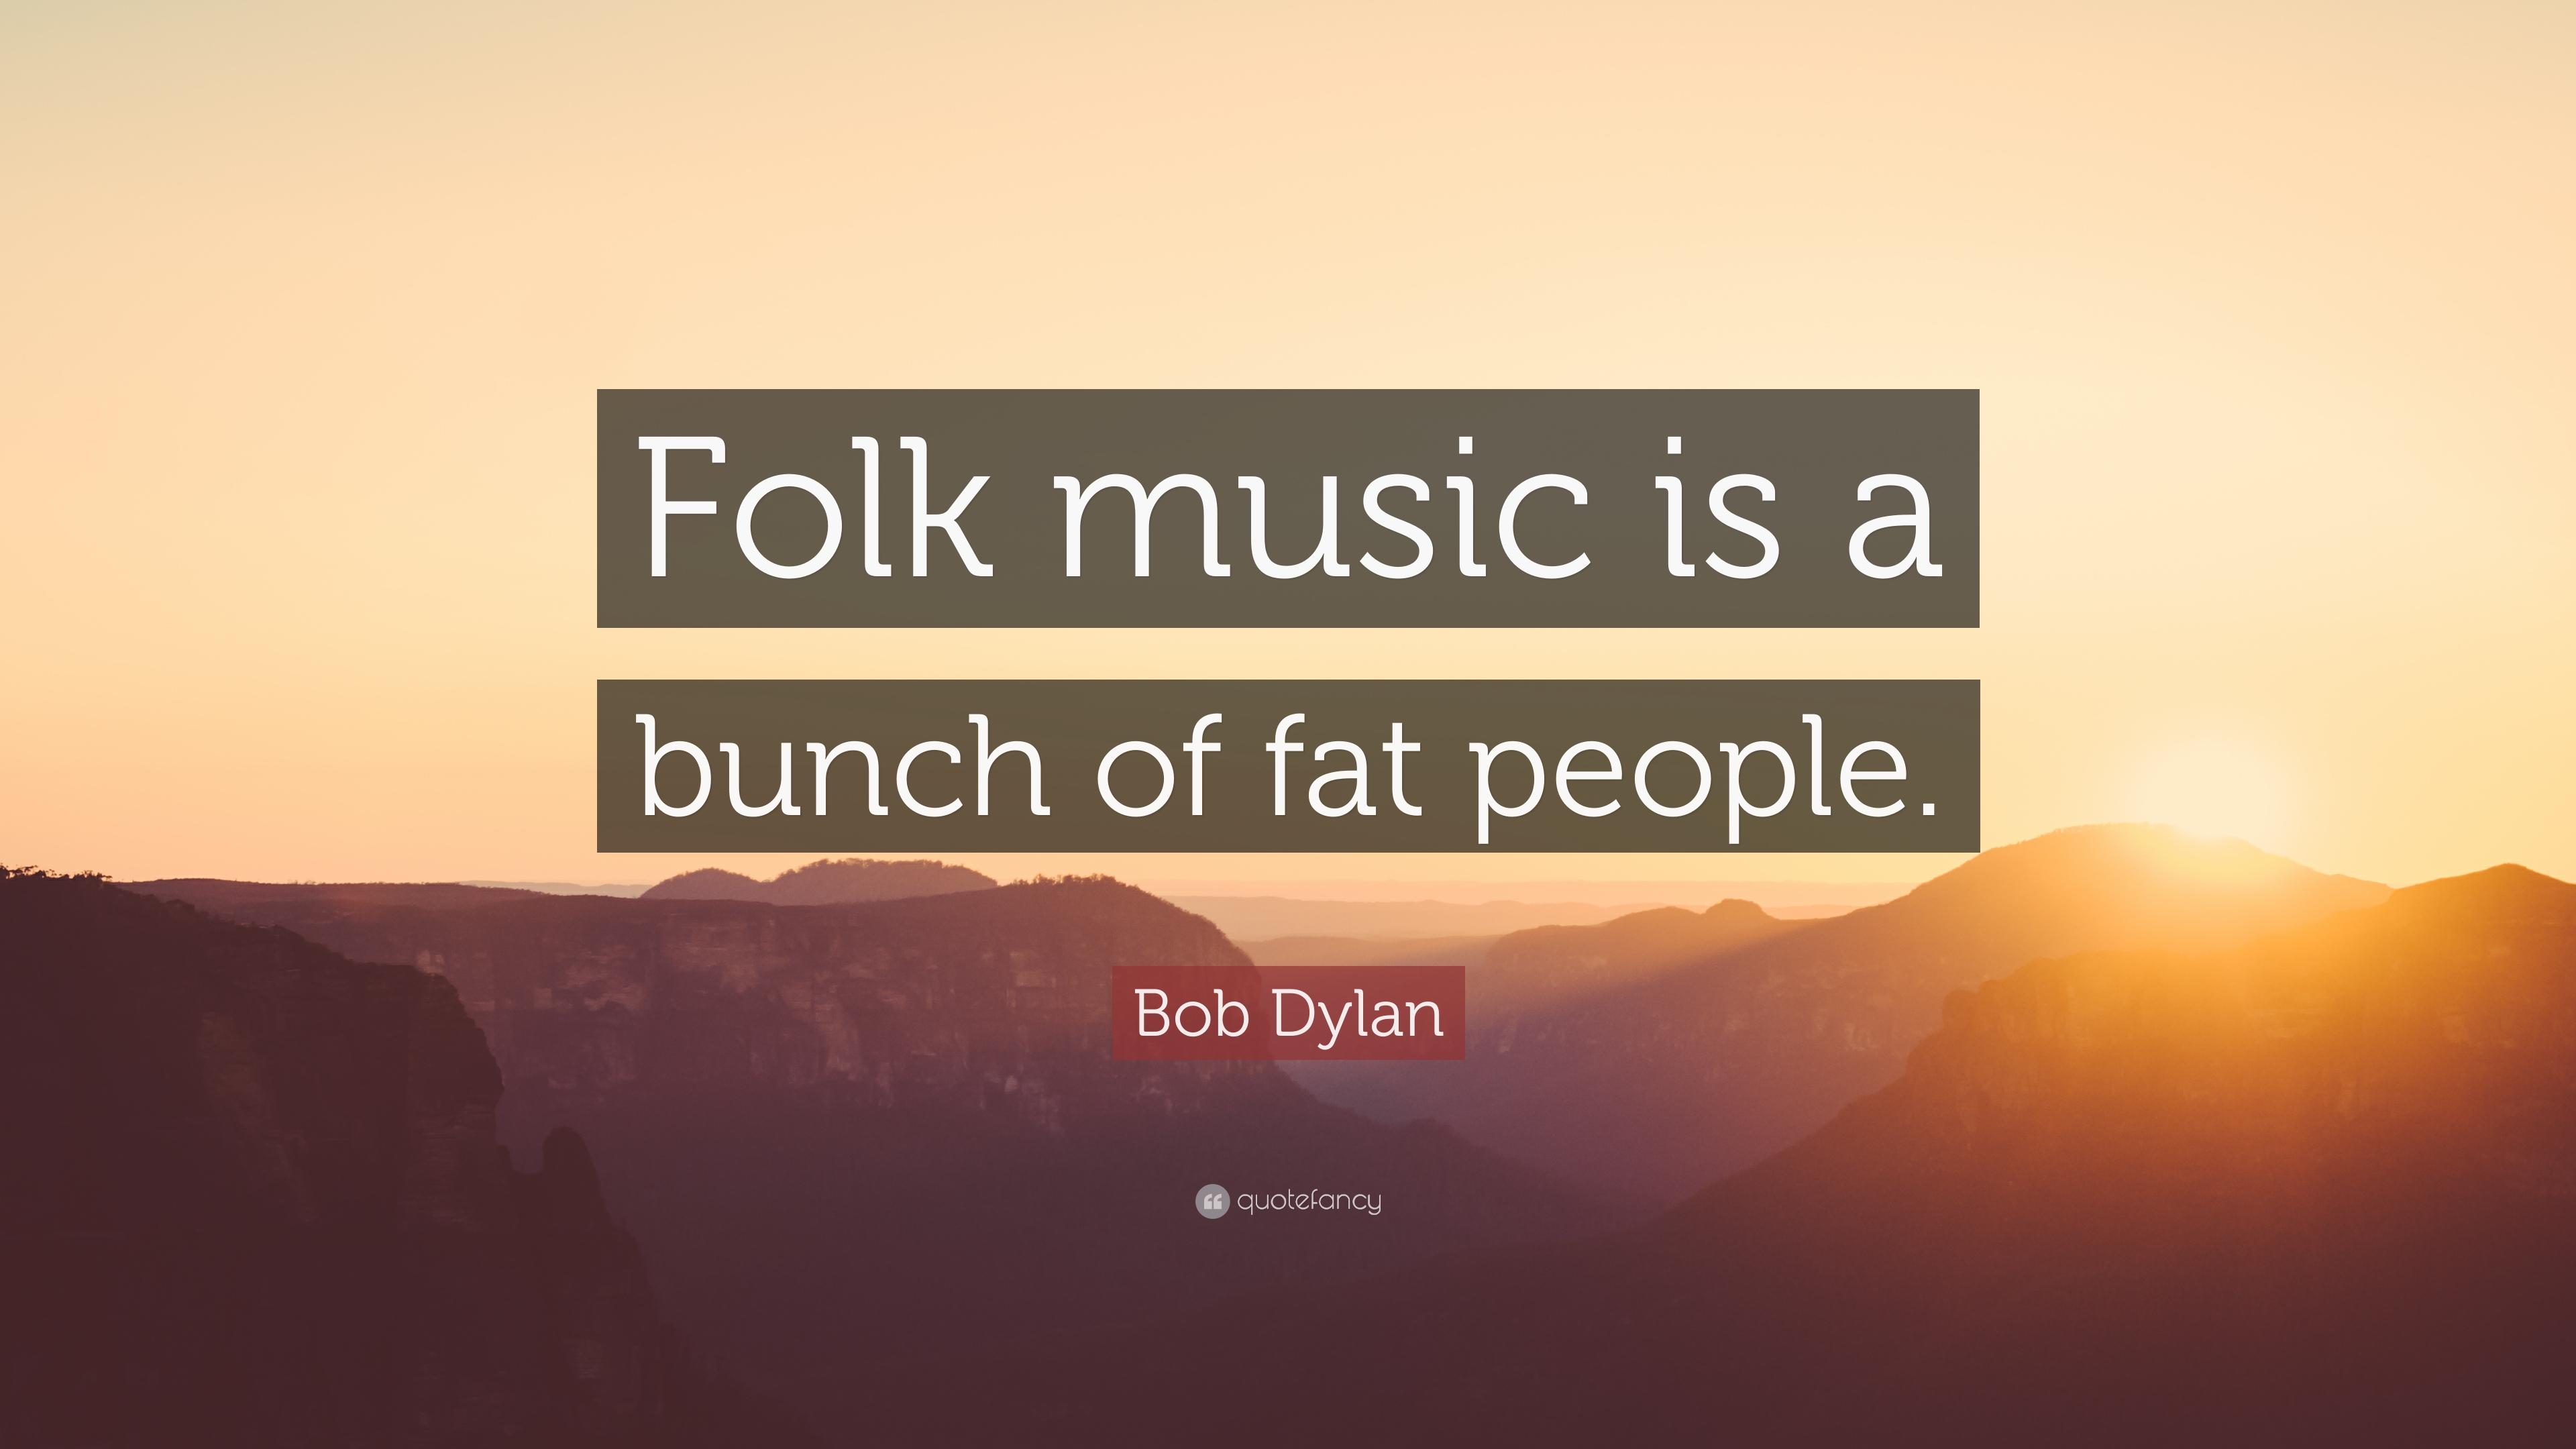 Bob Dylan Quote: “Folk music is a bunch of fat people.” 10